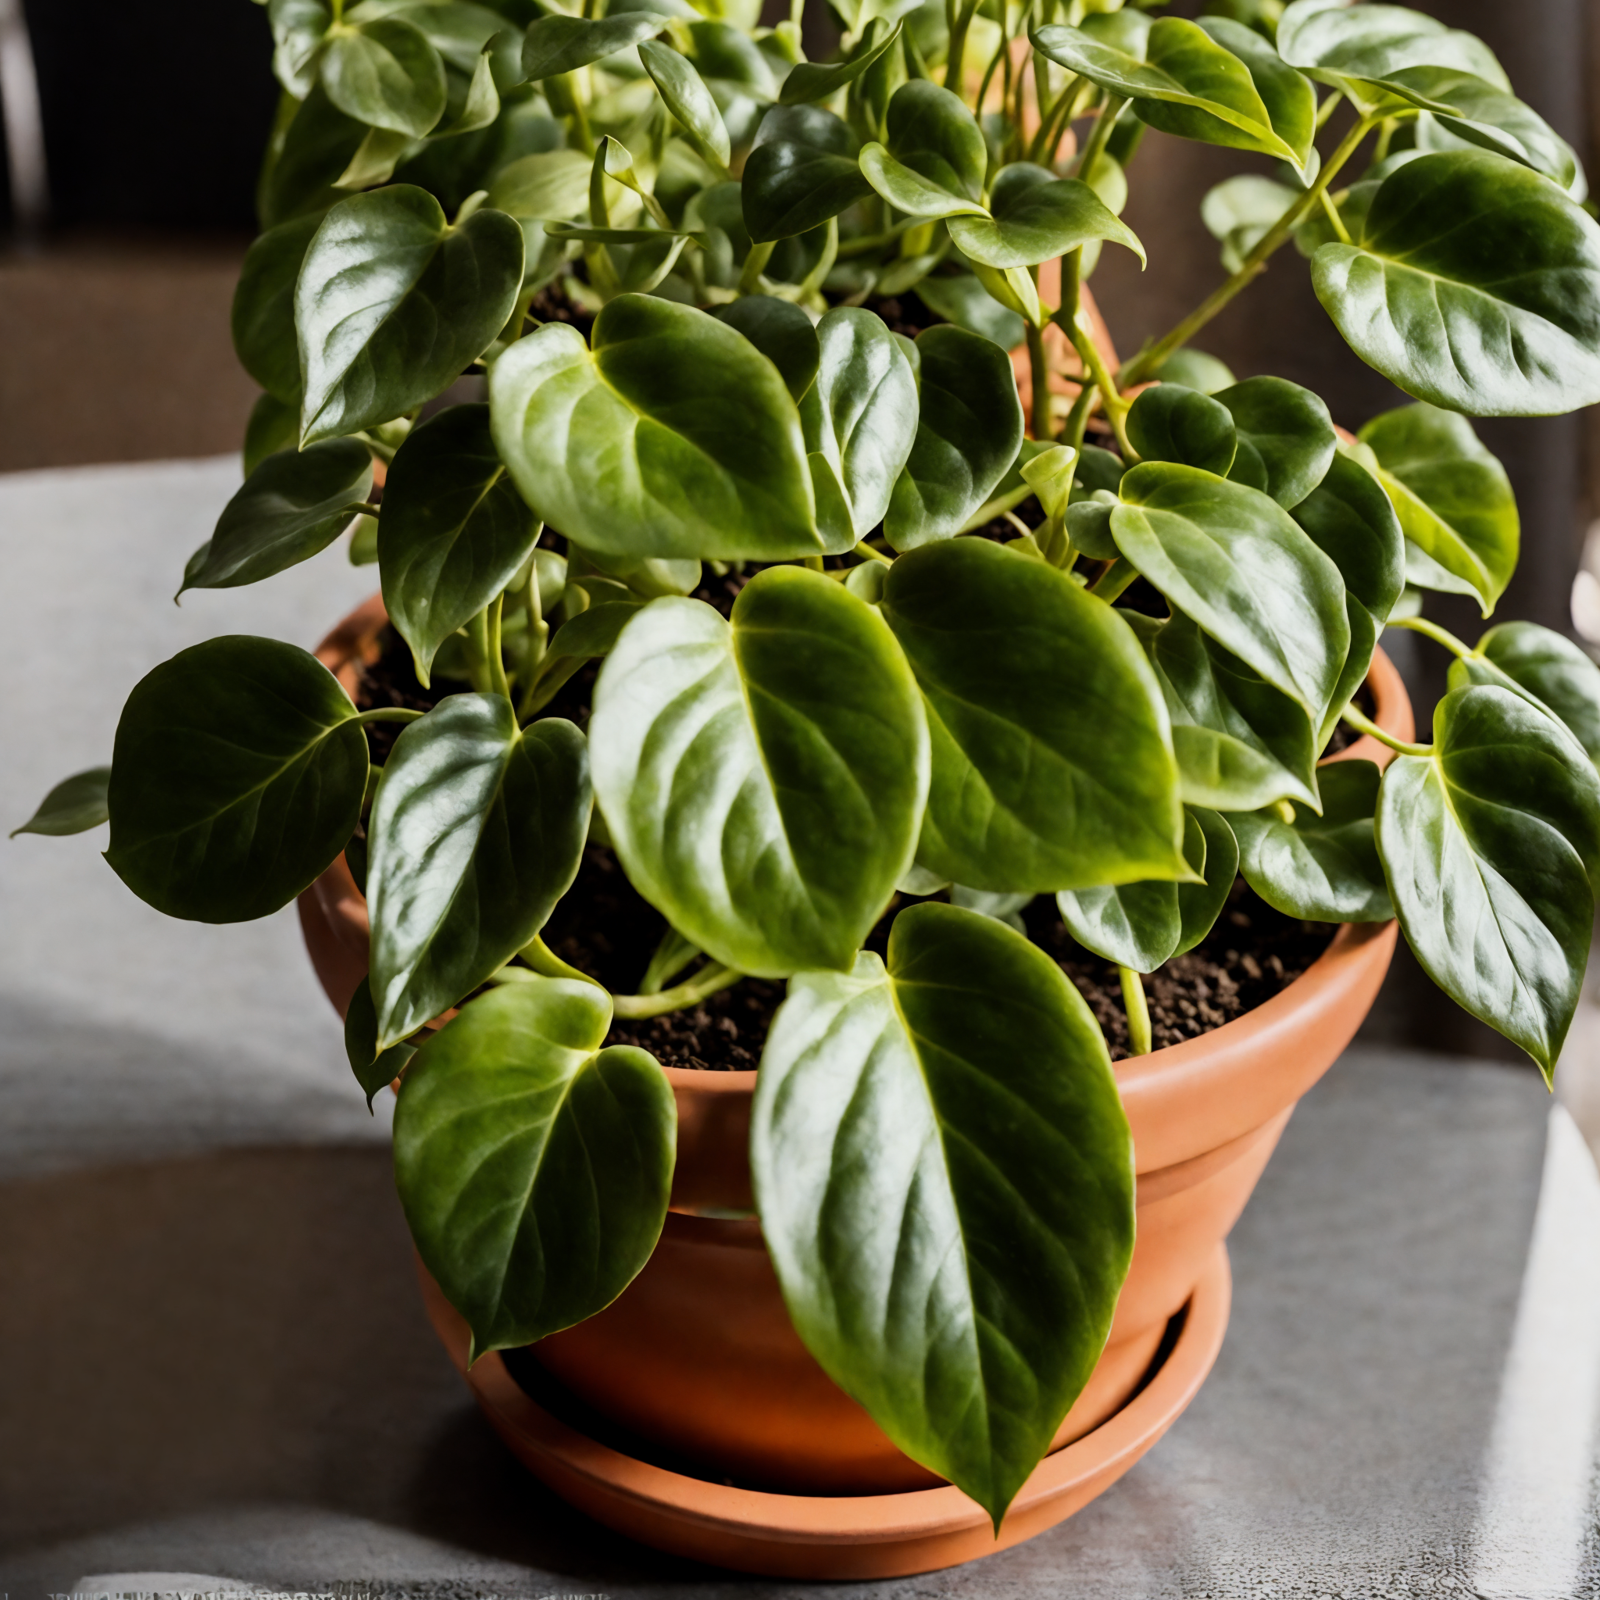 Peperomia serpens in a bowl planter on a table, with clear lighting and a dark background.